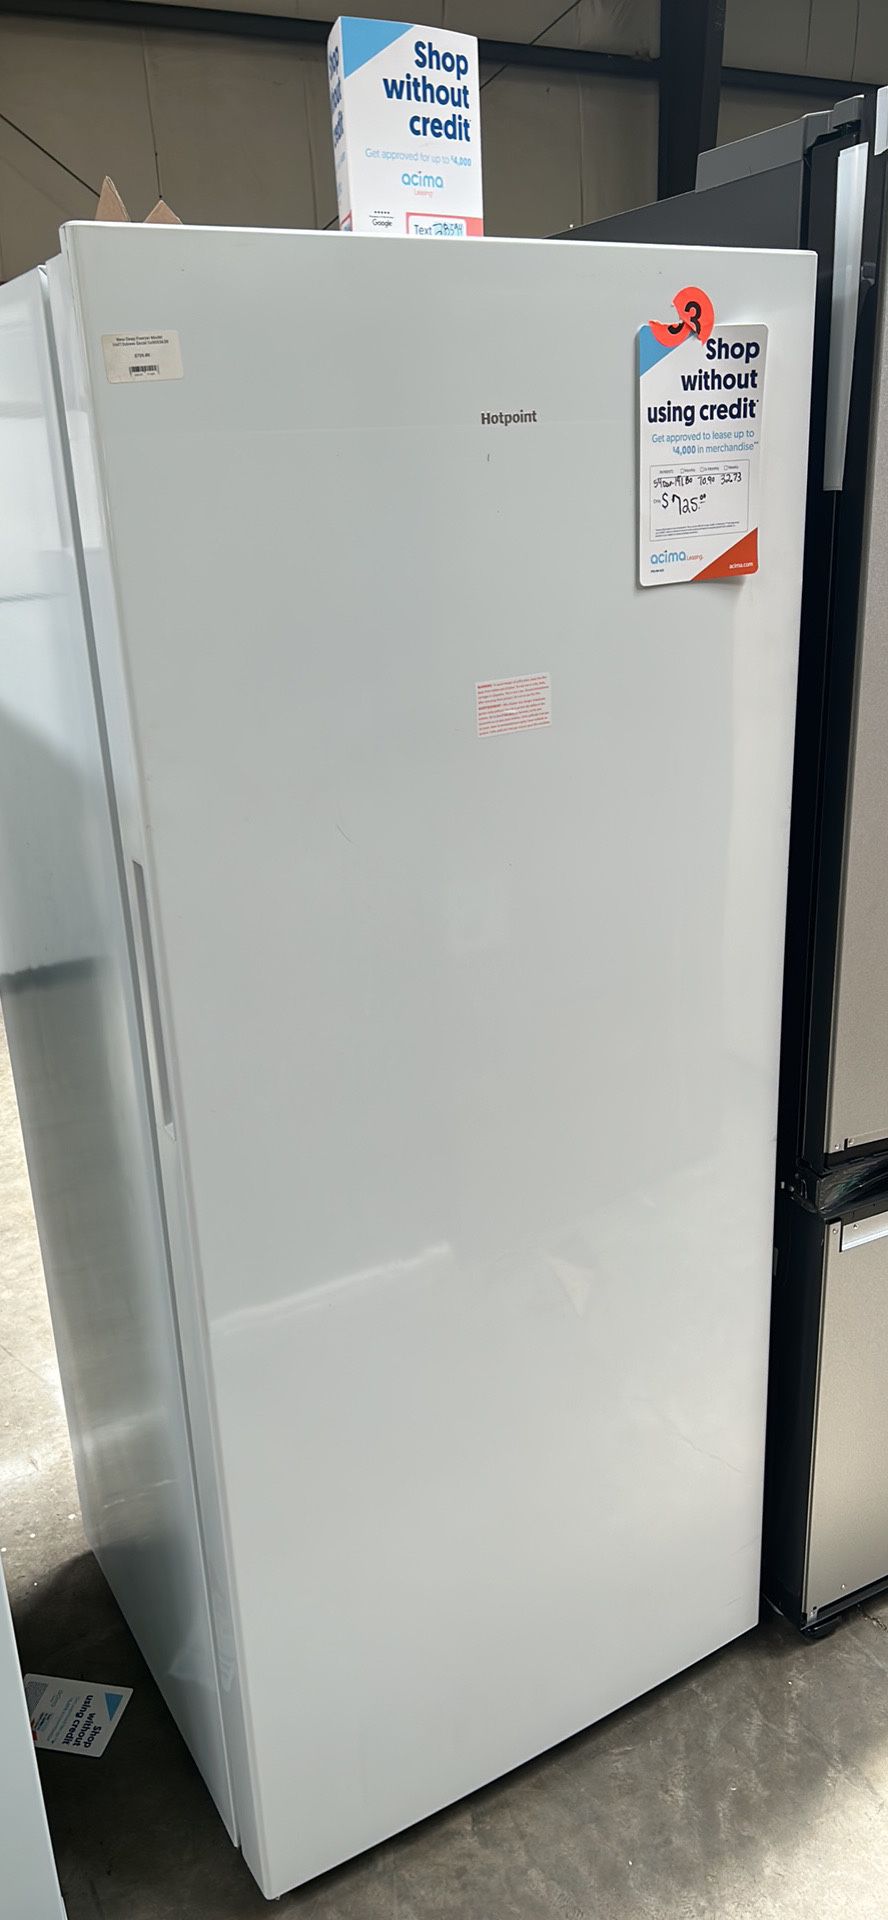 New Upright Freezer 13 Cubic Ft $699 1 Year Warranty Financing Available Only $54 Down No Credit Needed